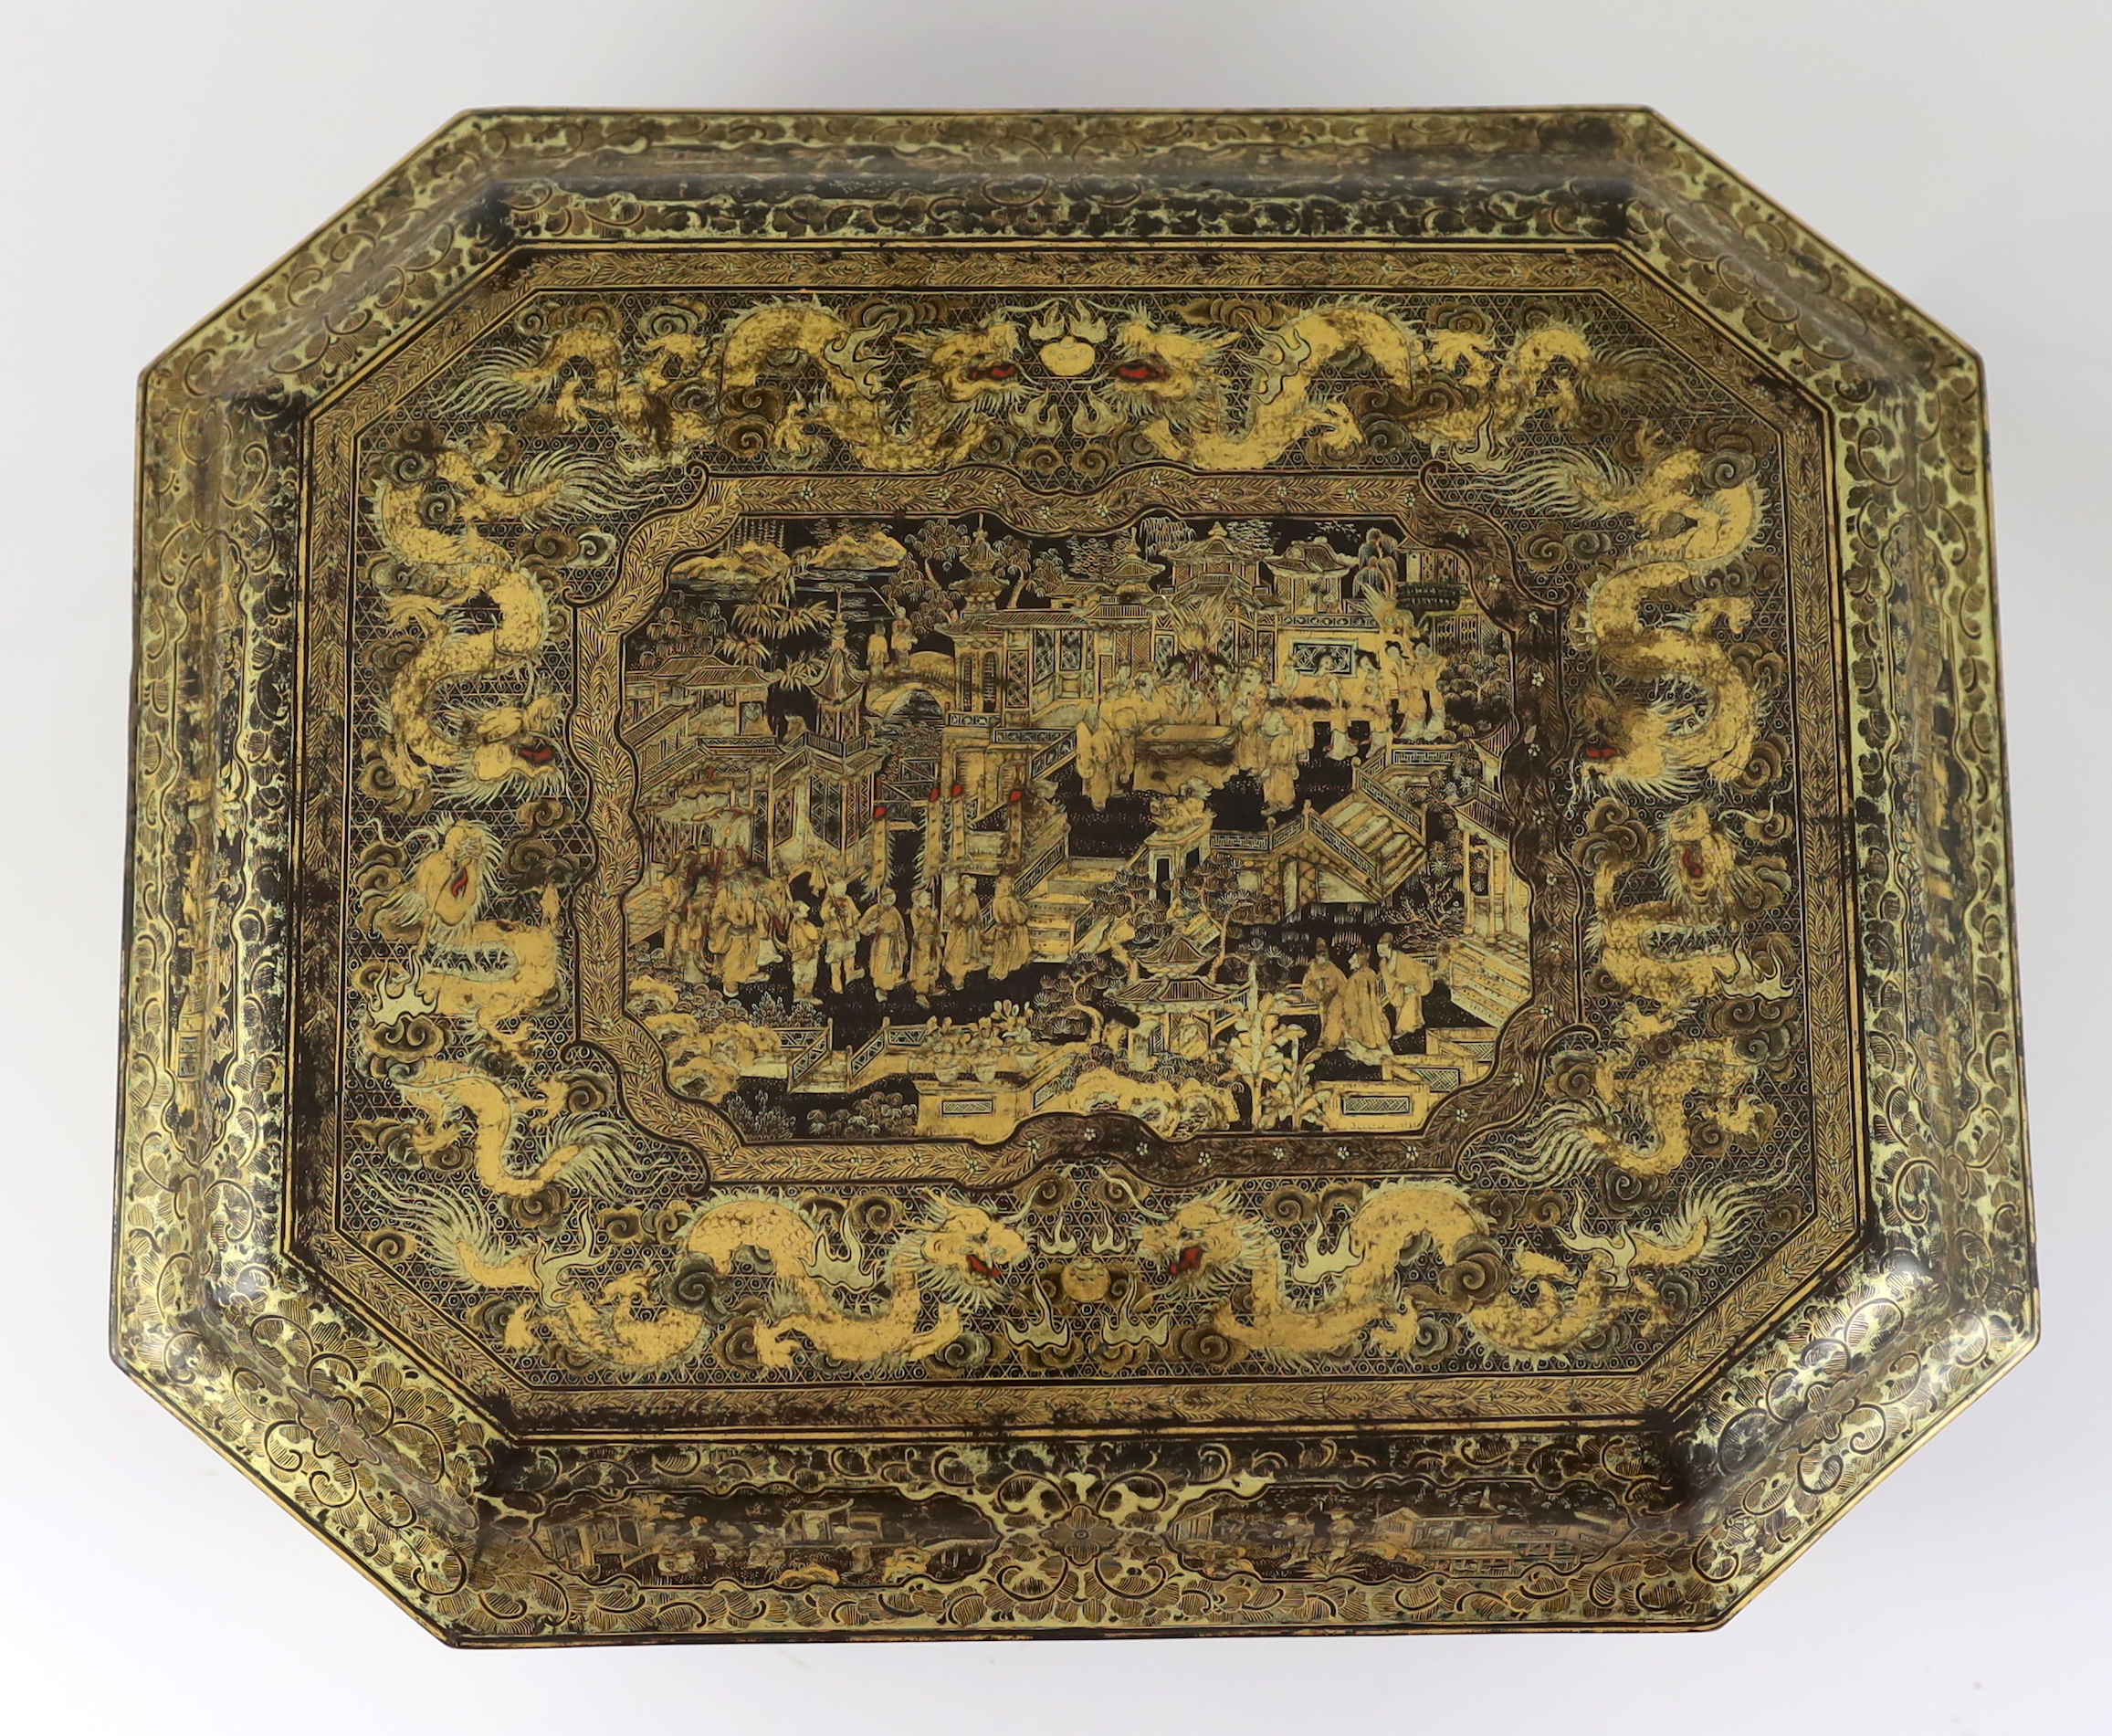 A Chinese Export gilt-decorated black lacquer games box, c.1830, decorated with figures amid - Image 4 of 7